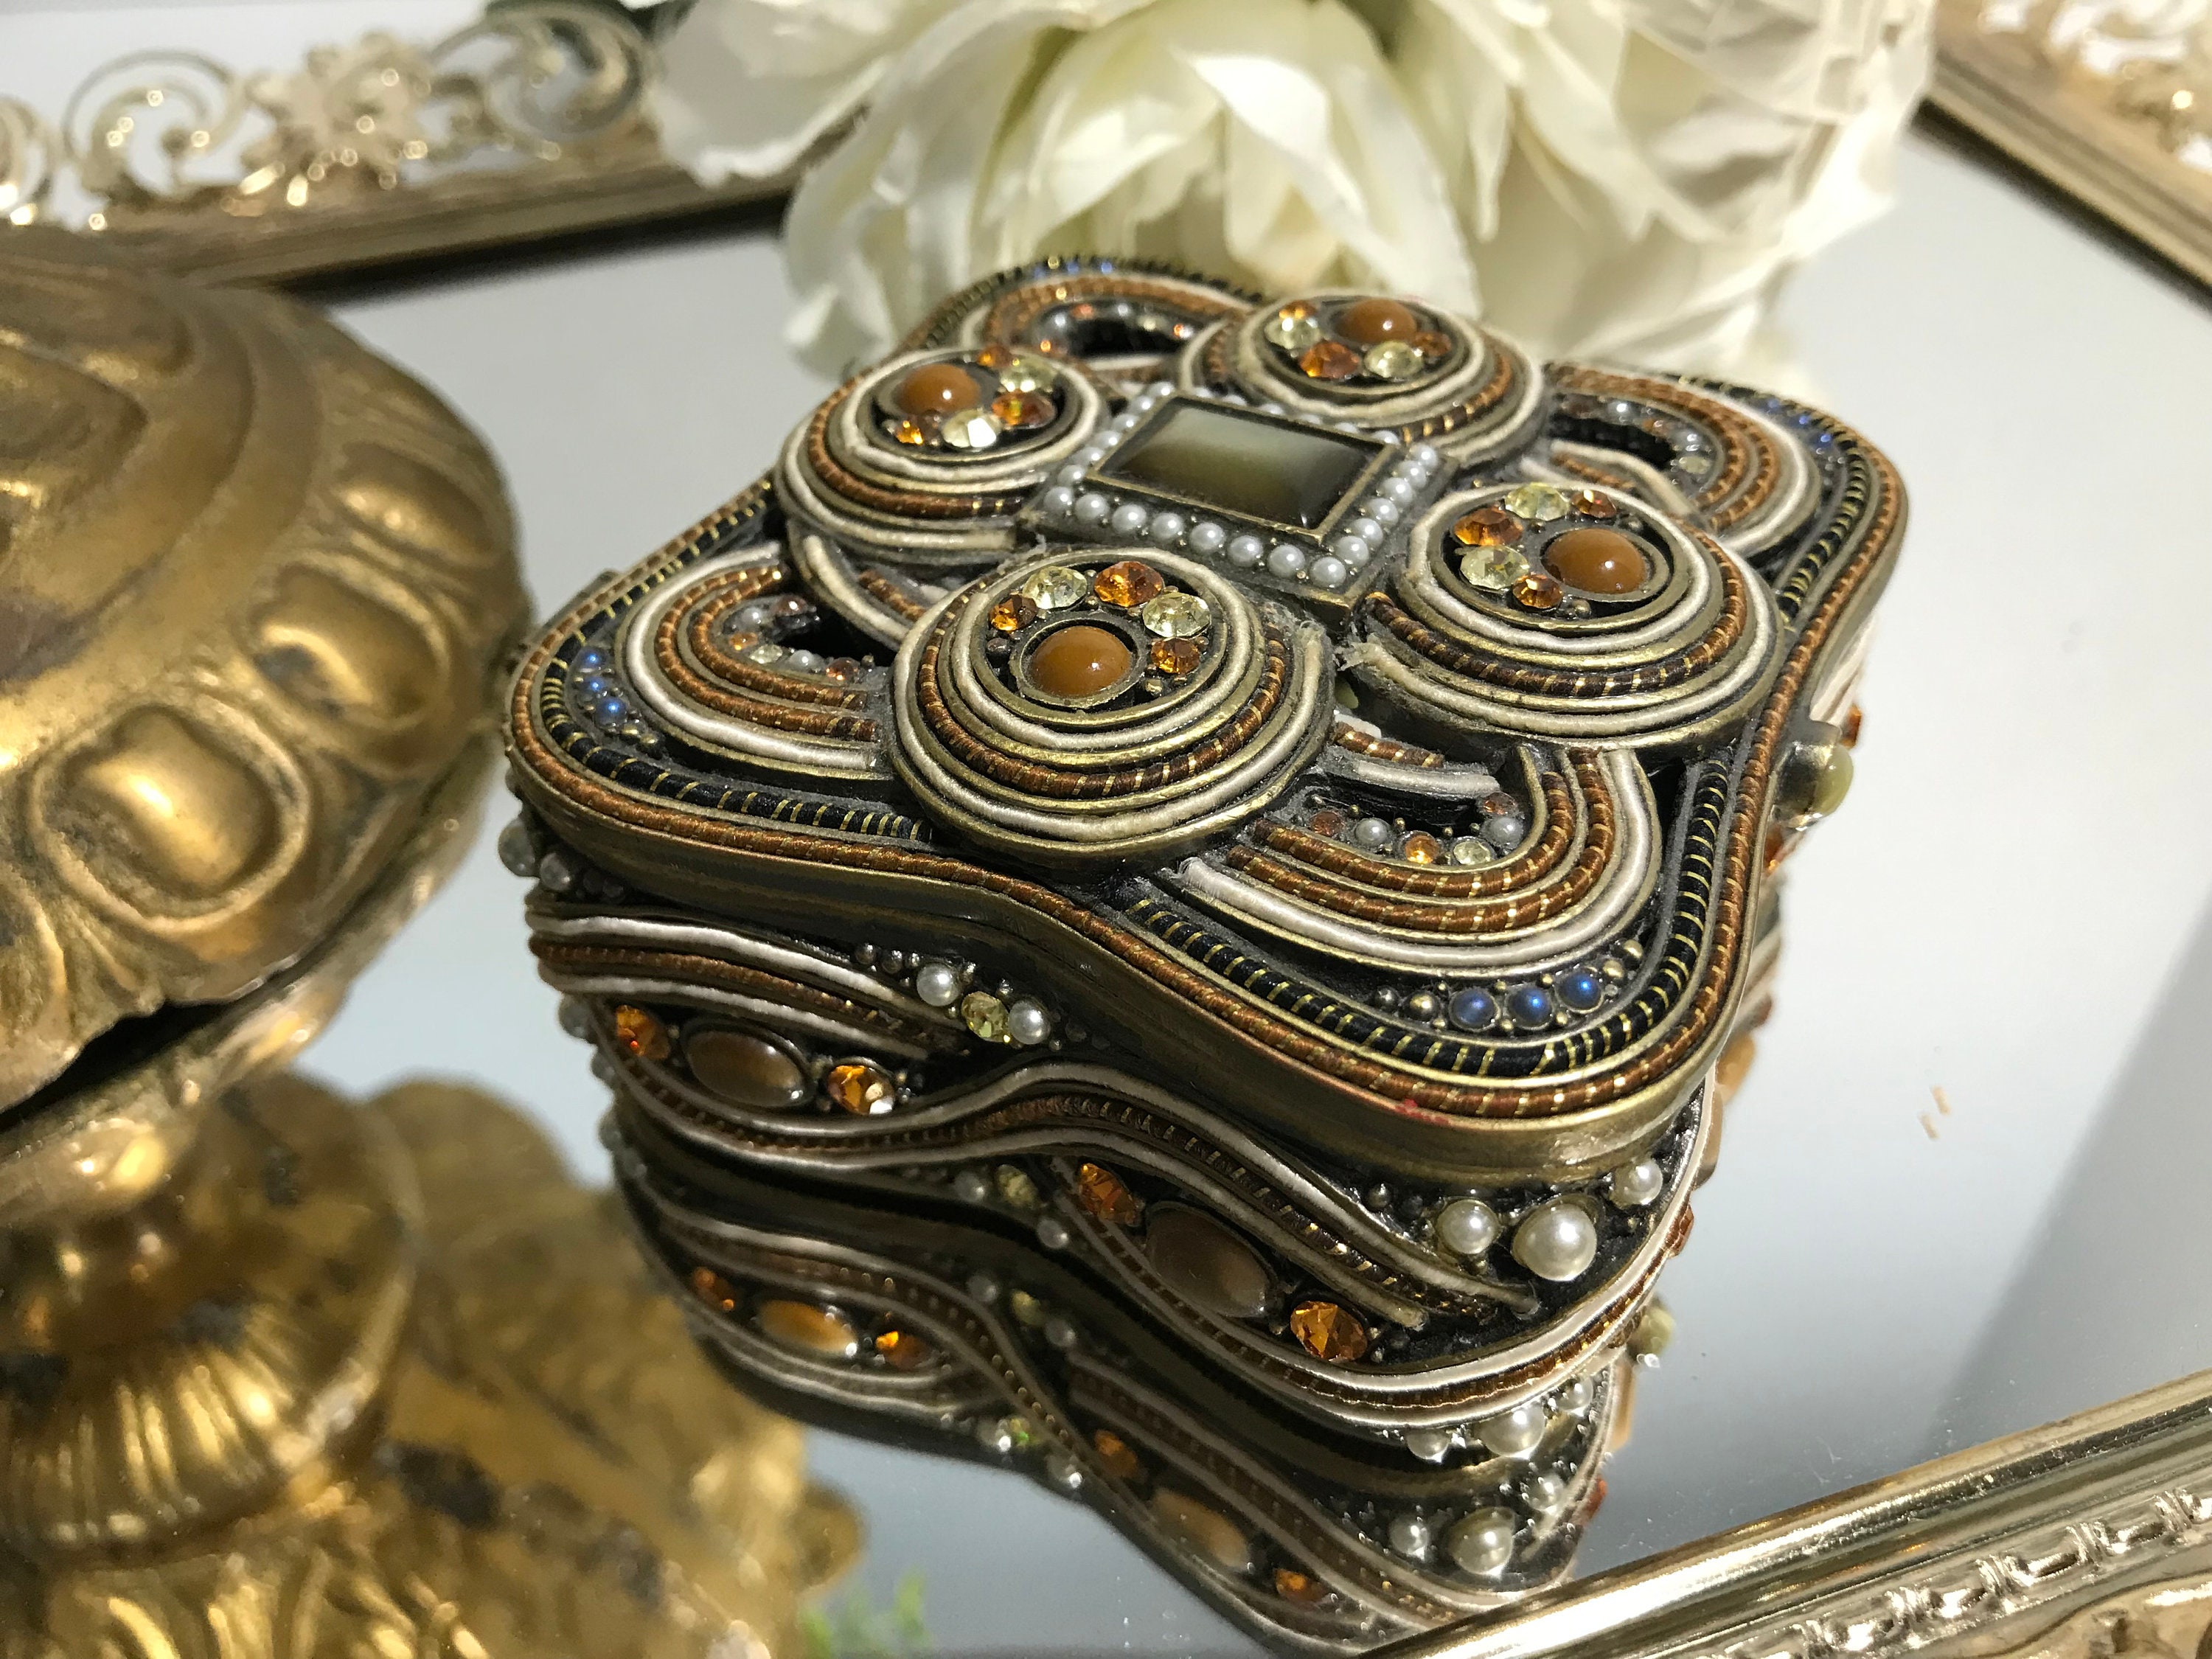 Jewellery Box Vintage Jewellery for Women Enamel Colored Diamond Double  Layer Jewelry Box High-end Exquisite Jewelry Storage Box Vintage Metal  Jewelry